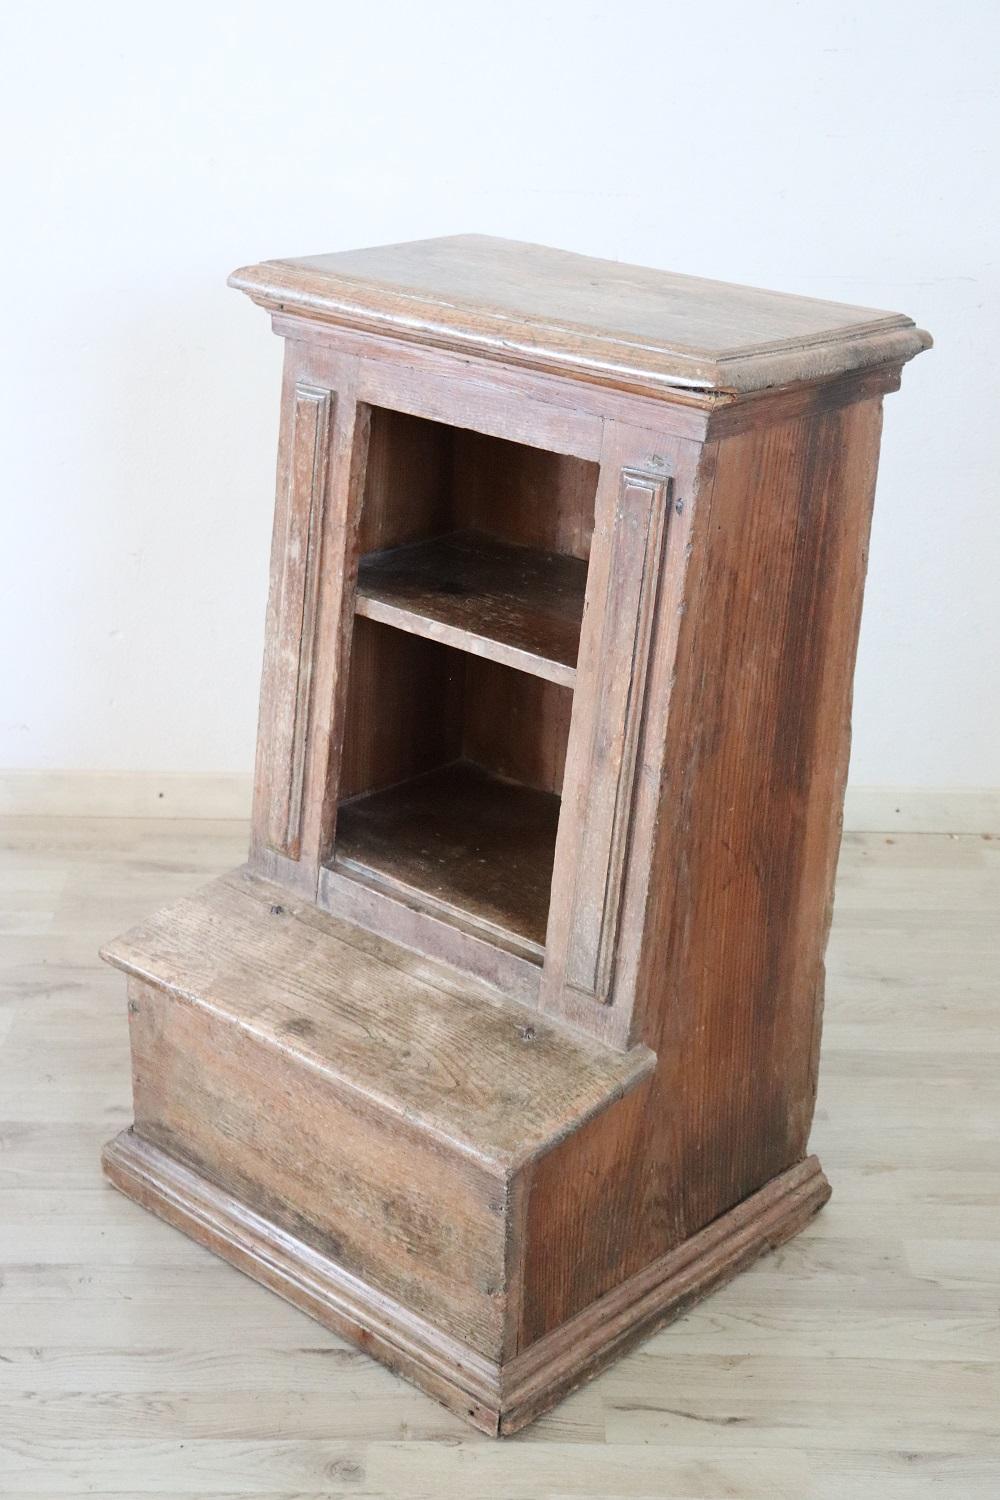 Rare antique Italian kneeler, very rustic in larch wood. Completely original and in its old condition, it has not been restored. Place this elegant antique Arma Christi prayer chair in your bedroom for daily devotions.